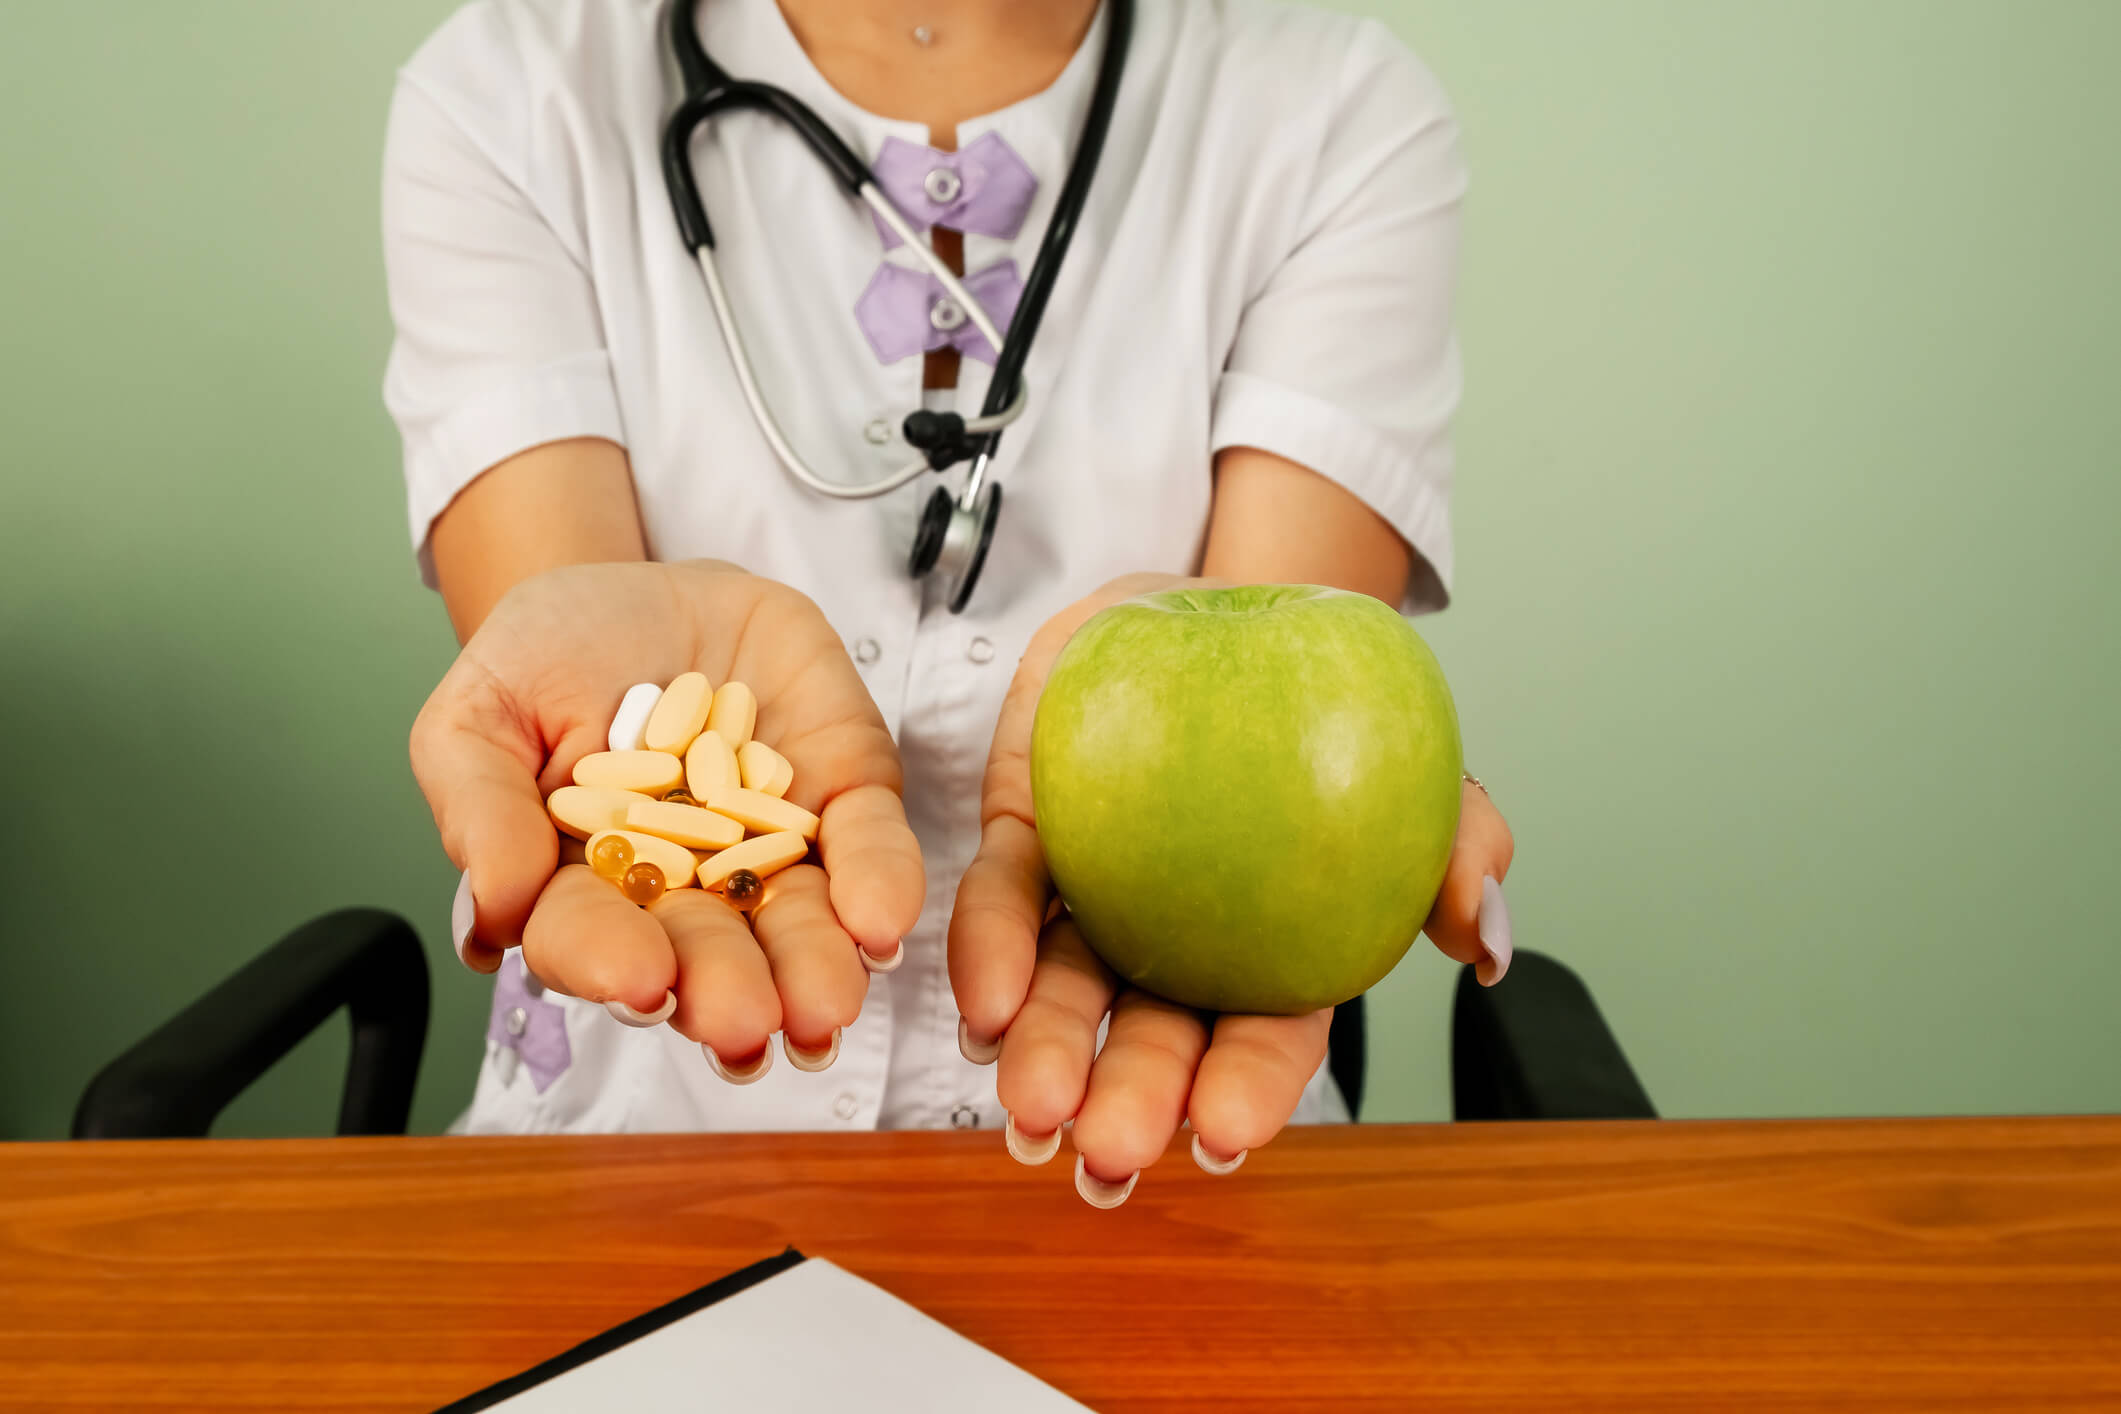 A doctor is seated before a desk. She has two outstretched hands, one of which contains some pills and the other contains an apple.